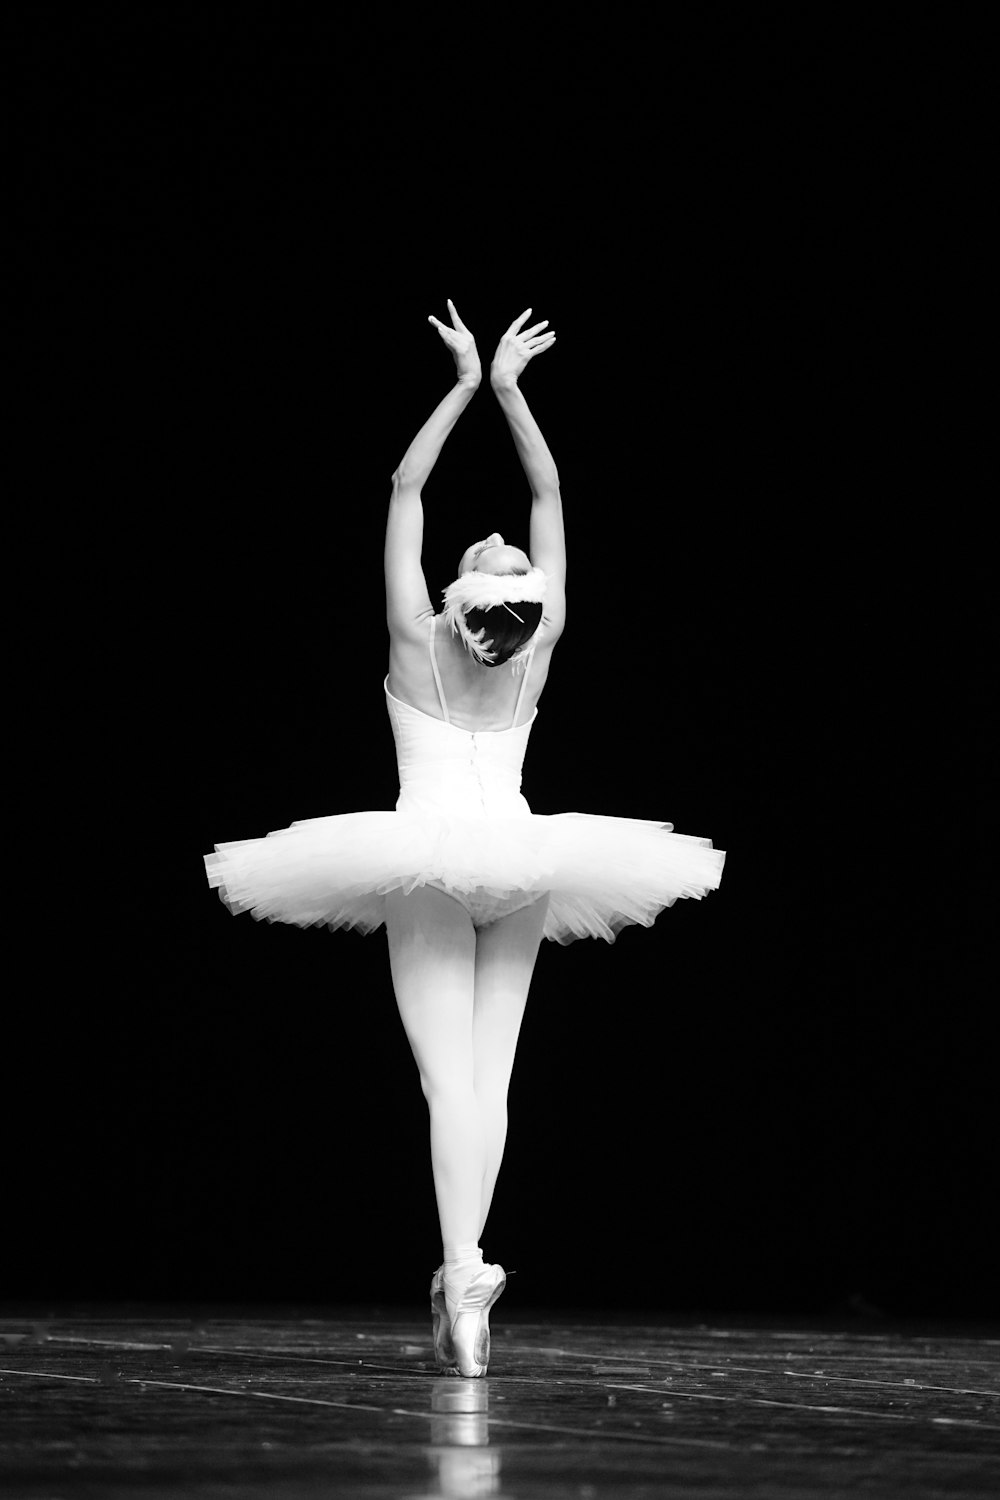 350+ Ballerina Pictures | Download Free Images & Stock Photos on Unsplash